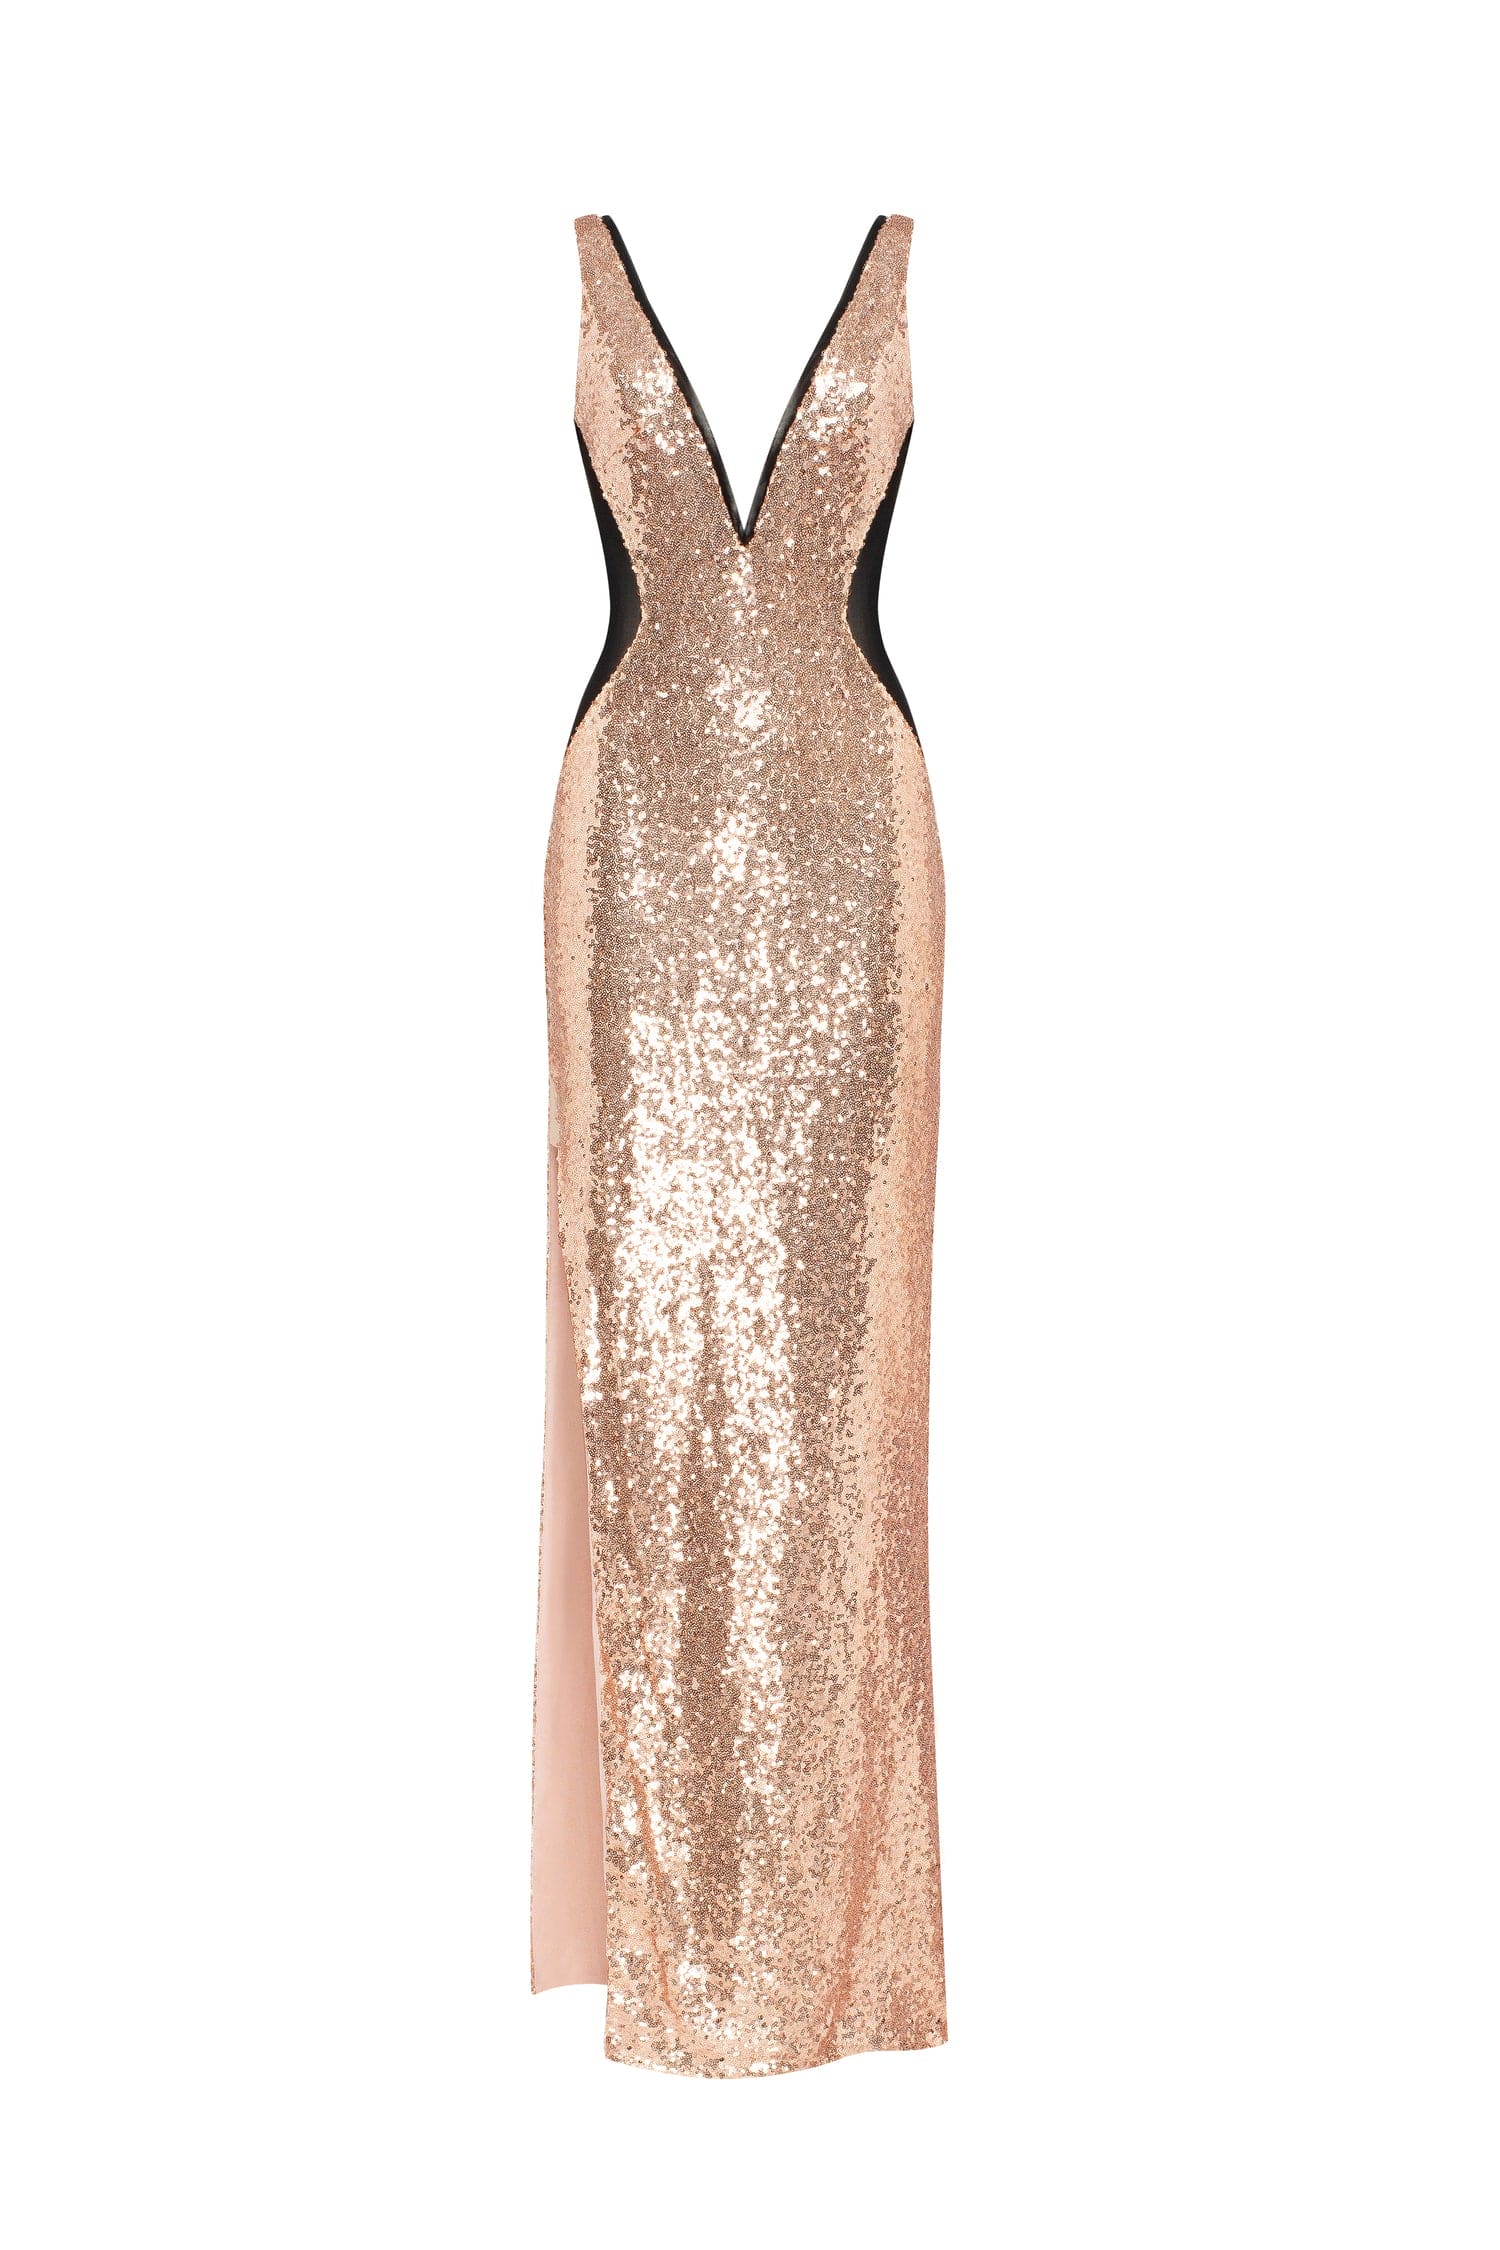 Center of Attention Sequins Dress - Gold, Extra Small / Gold